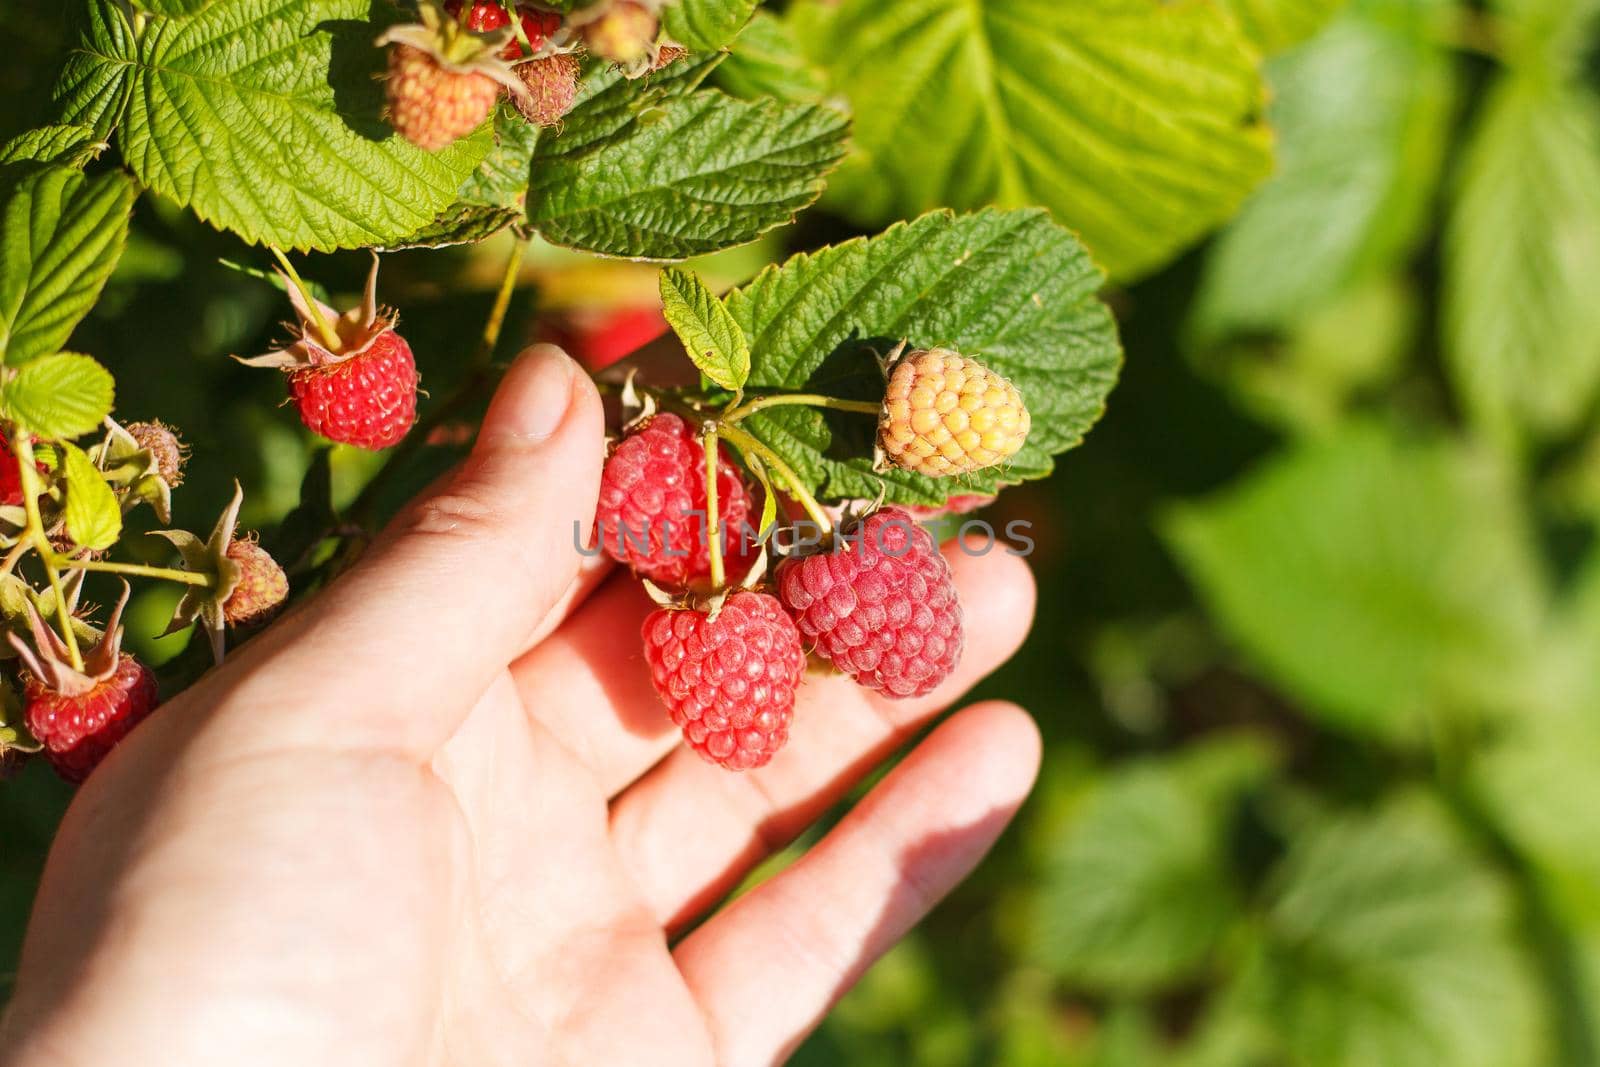 A woman's hand picks ripe raspberries from a bush. Ripe raspberries. Collection of raspberries. Raspberries - collection from the bush. The hand holds a red raspberry.